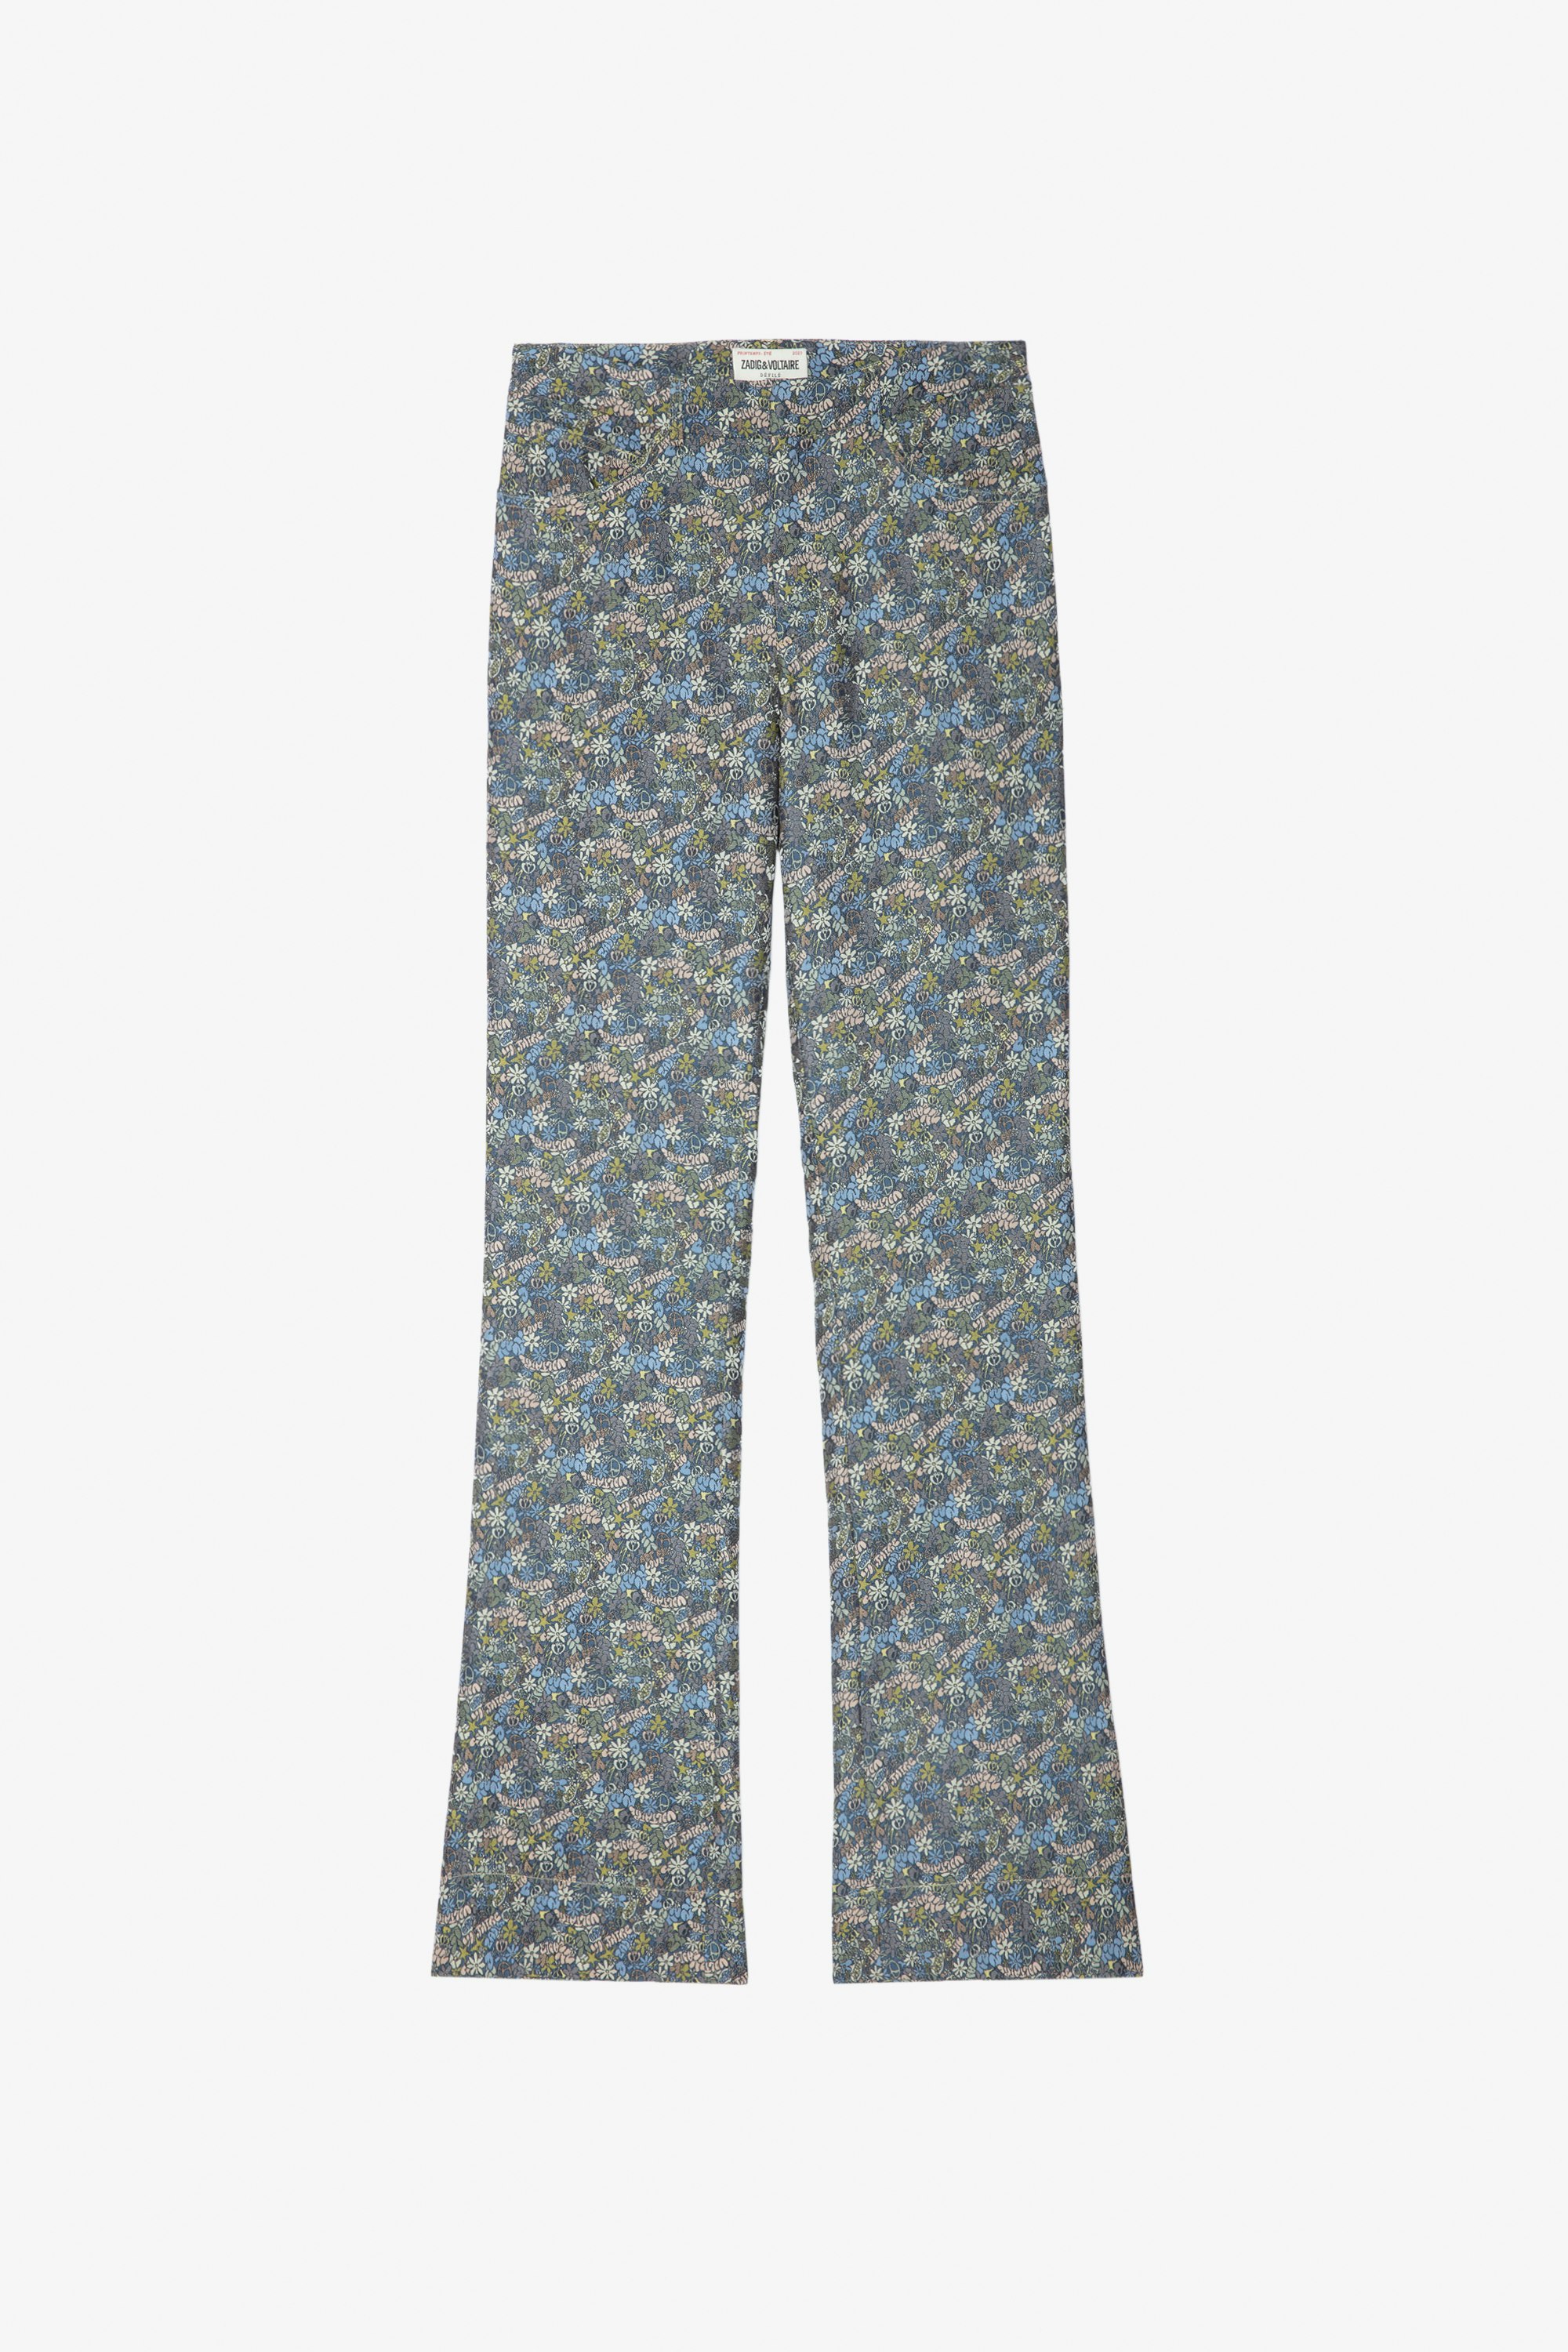 Pistol Trousers Women's flared trousers in multicoloured floral jacquard